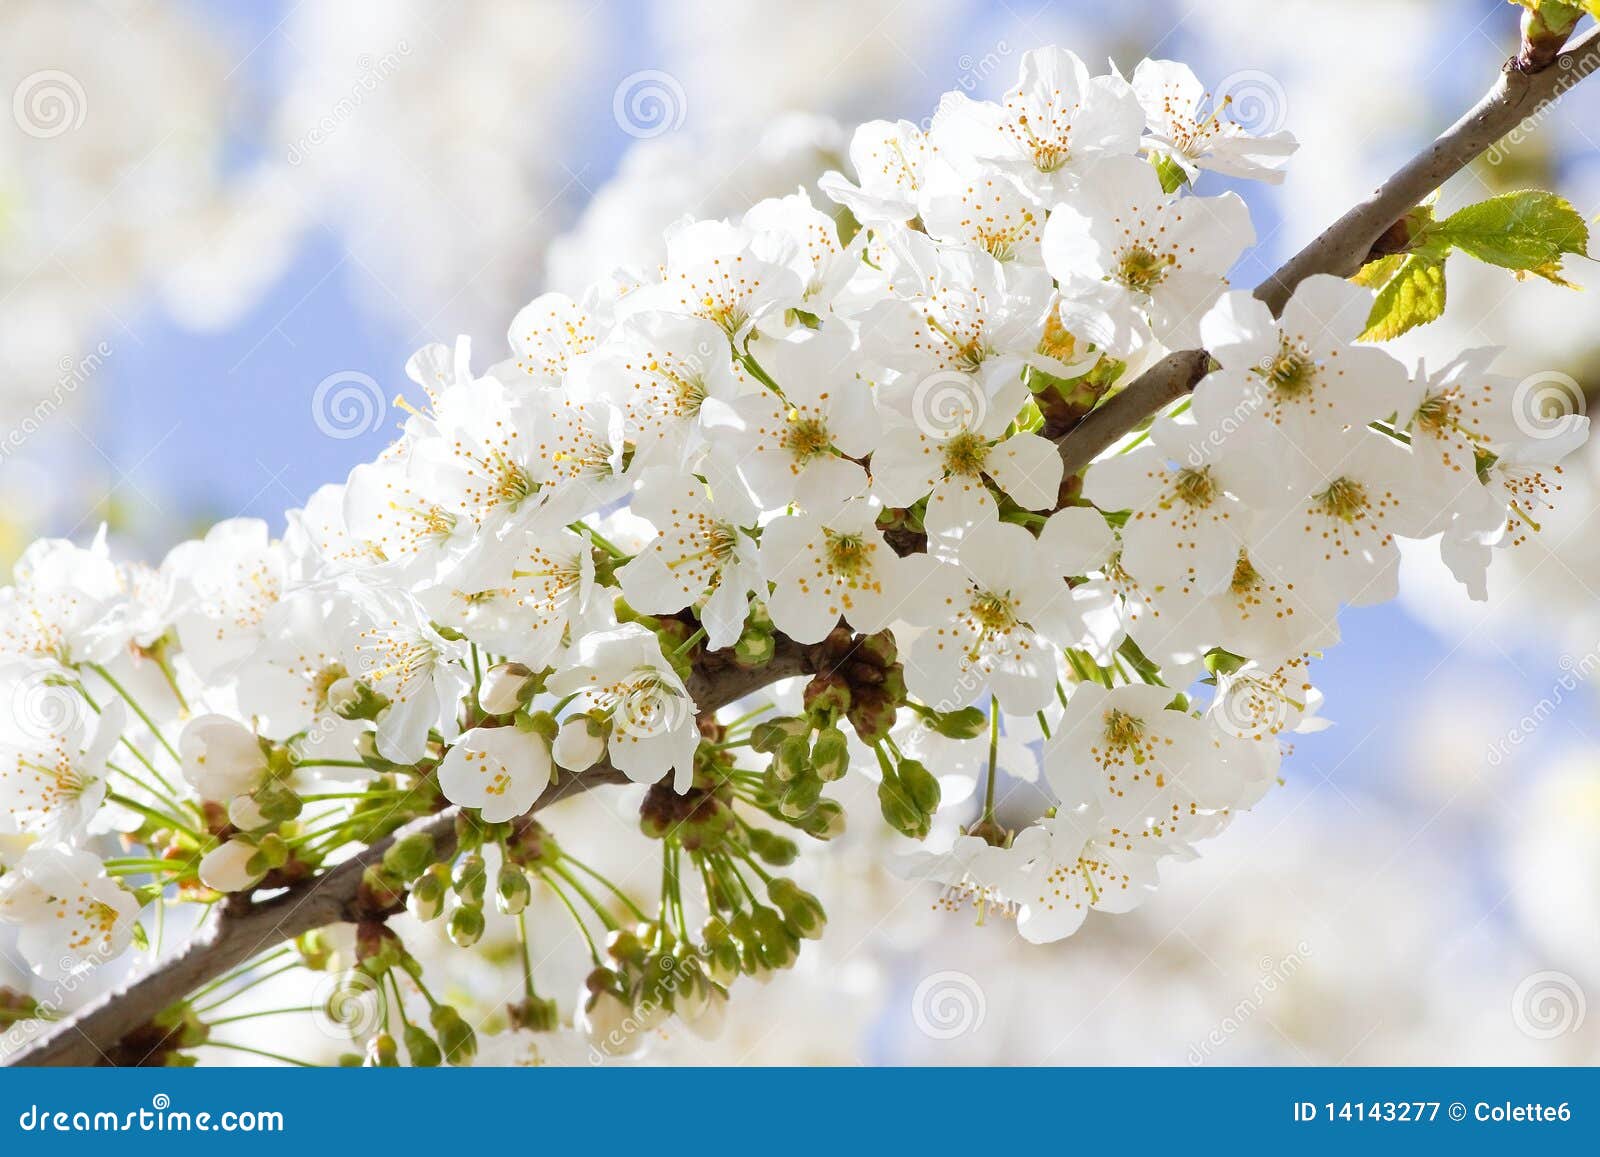 branch with white cherry blossom in spring